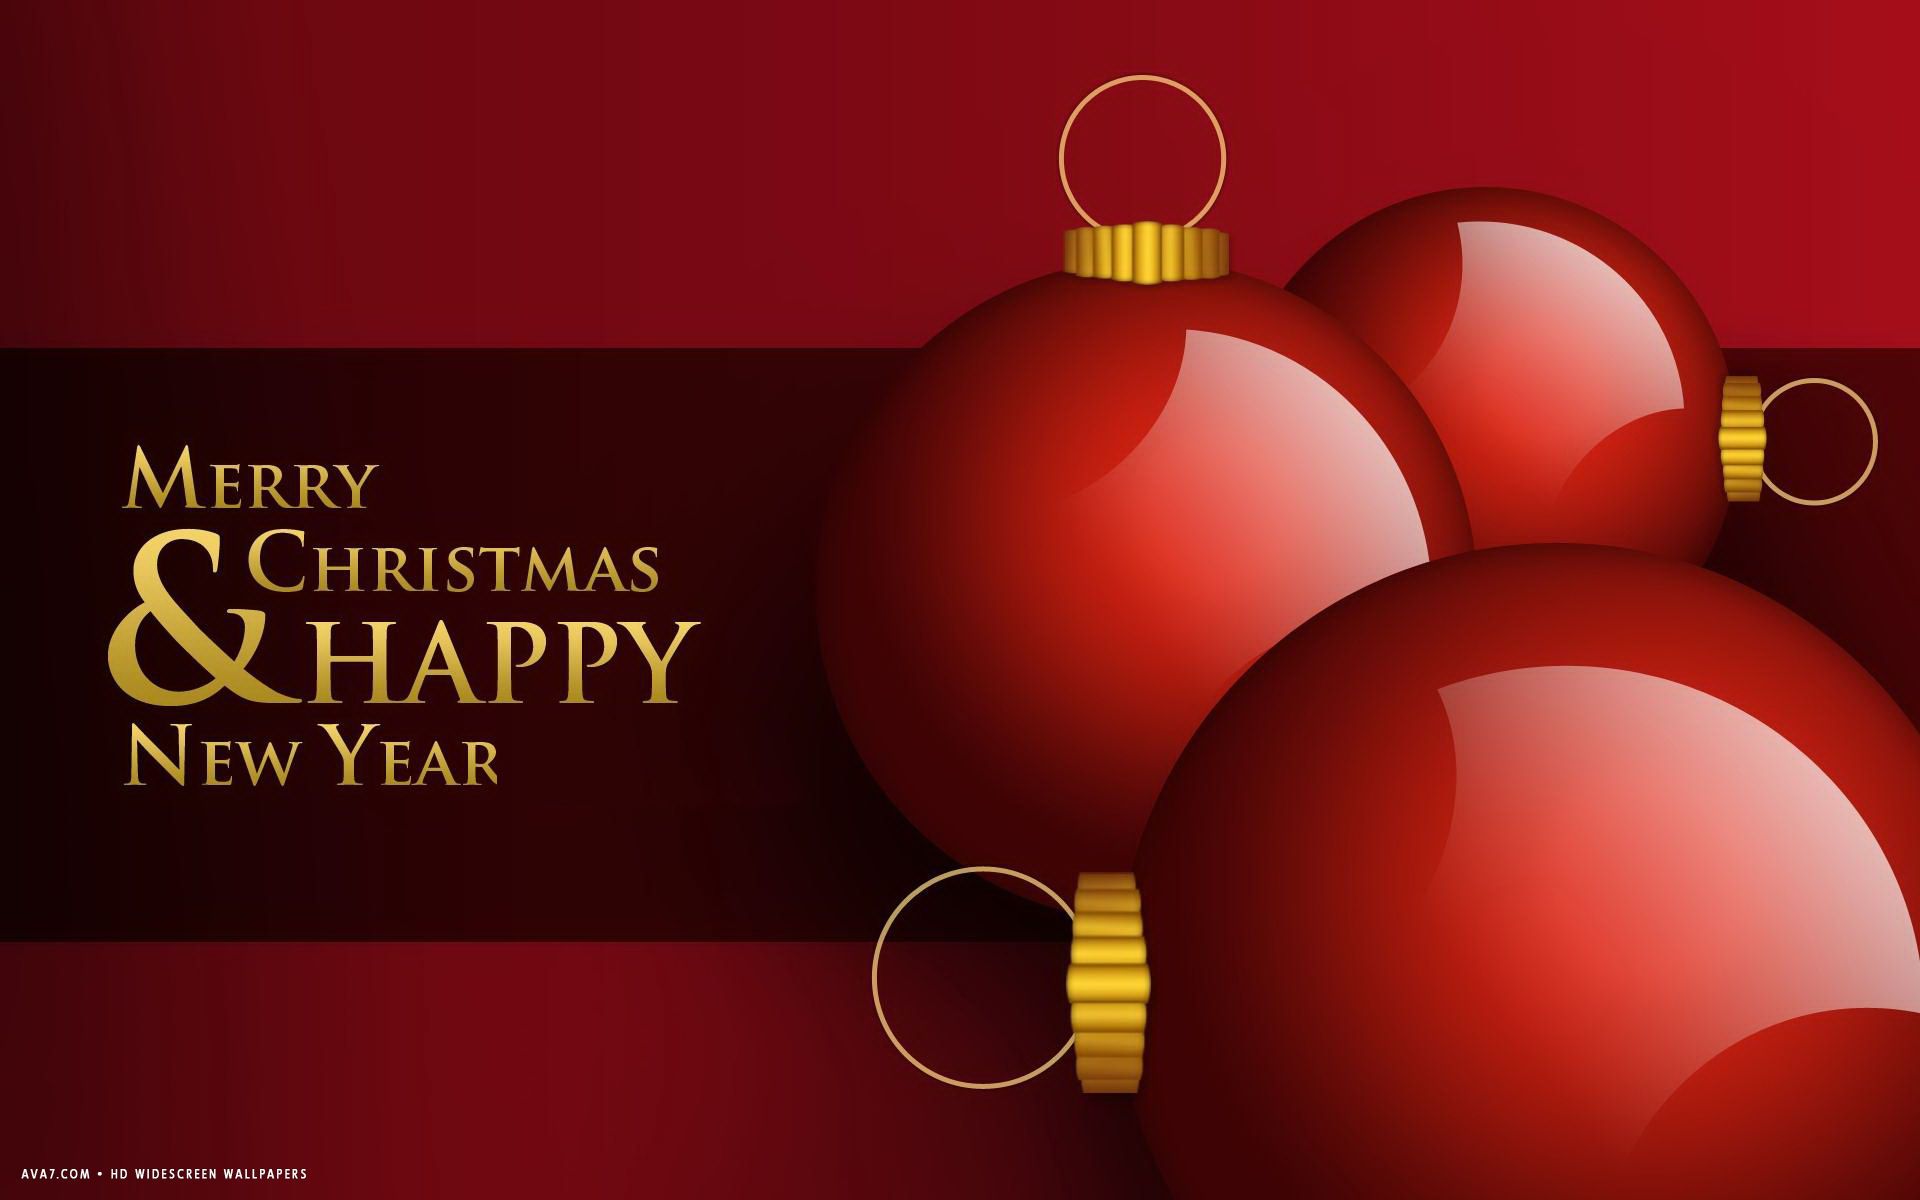 merry christmas and happy new year glass balls holiday HD widescreen wallpaper / holidays background